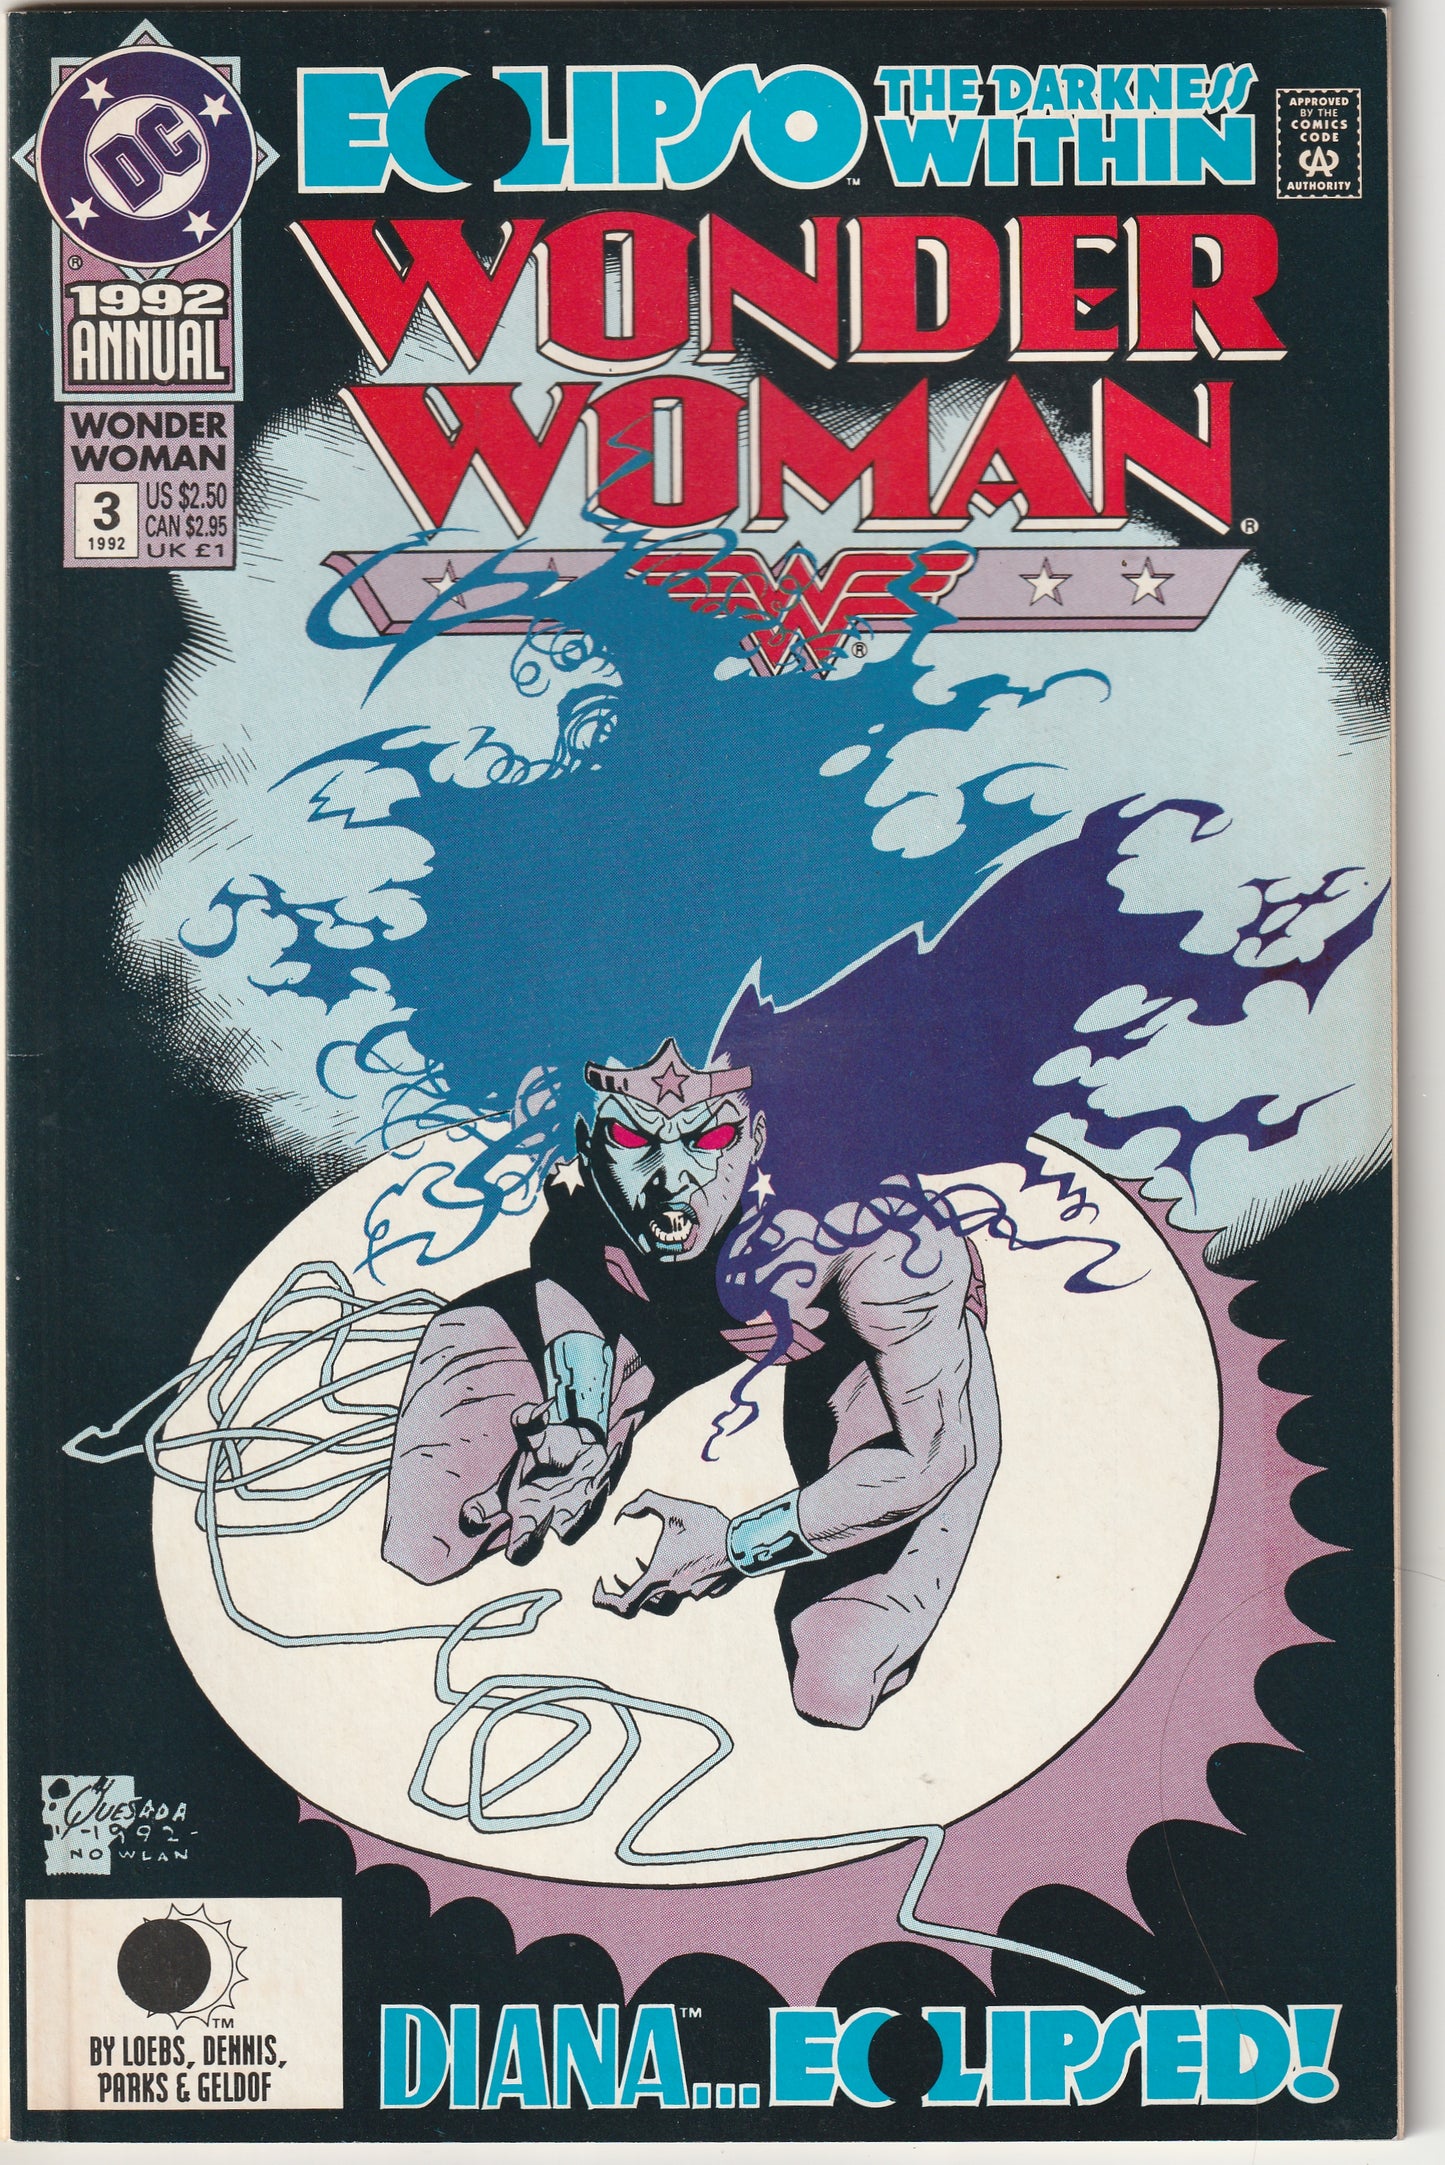 Wonder Woman Annual #3 (1992) - Part 10: Eclipso The Darkness Within